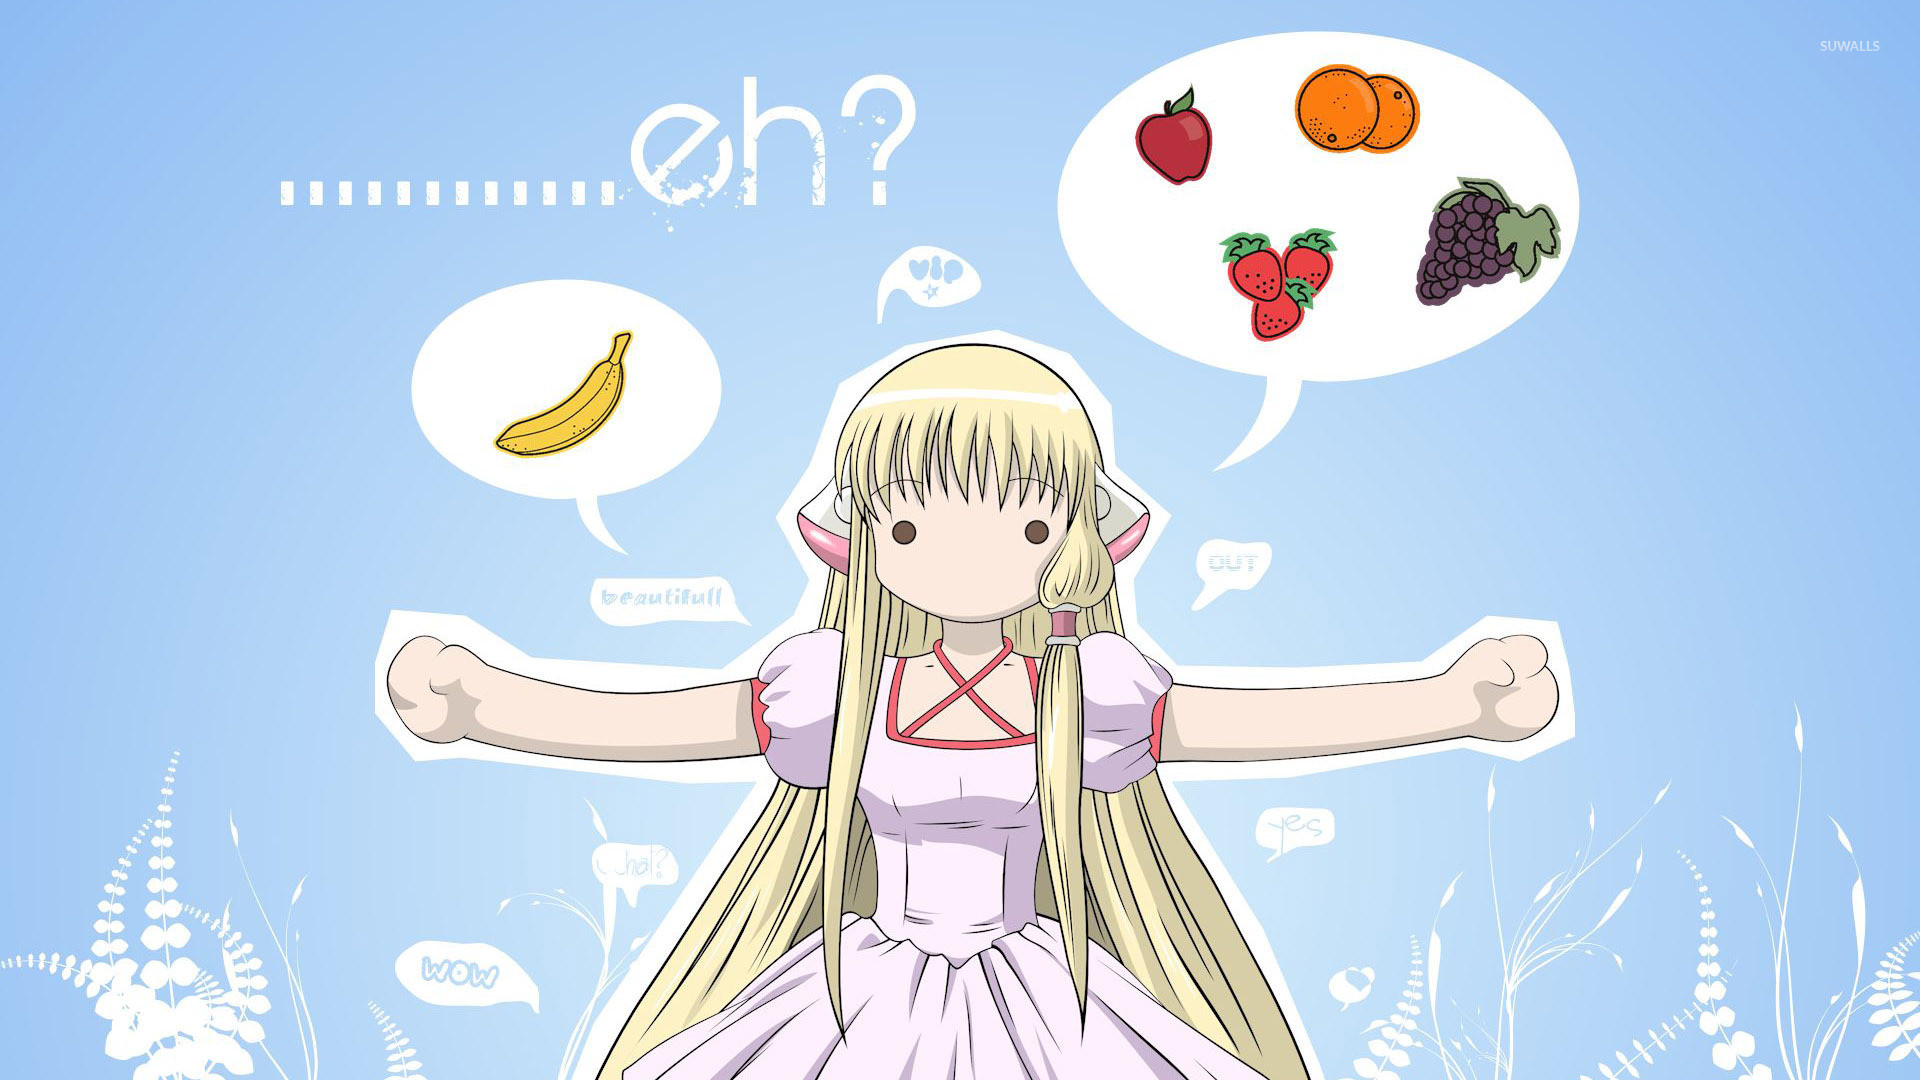 1920x1080 Chii from Chobits wallpaper